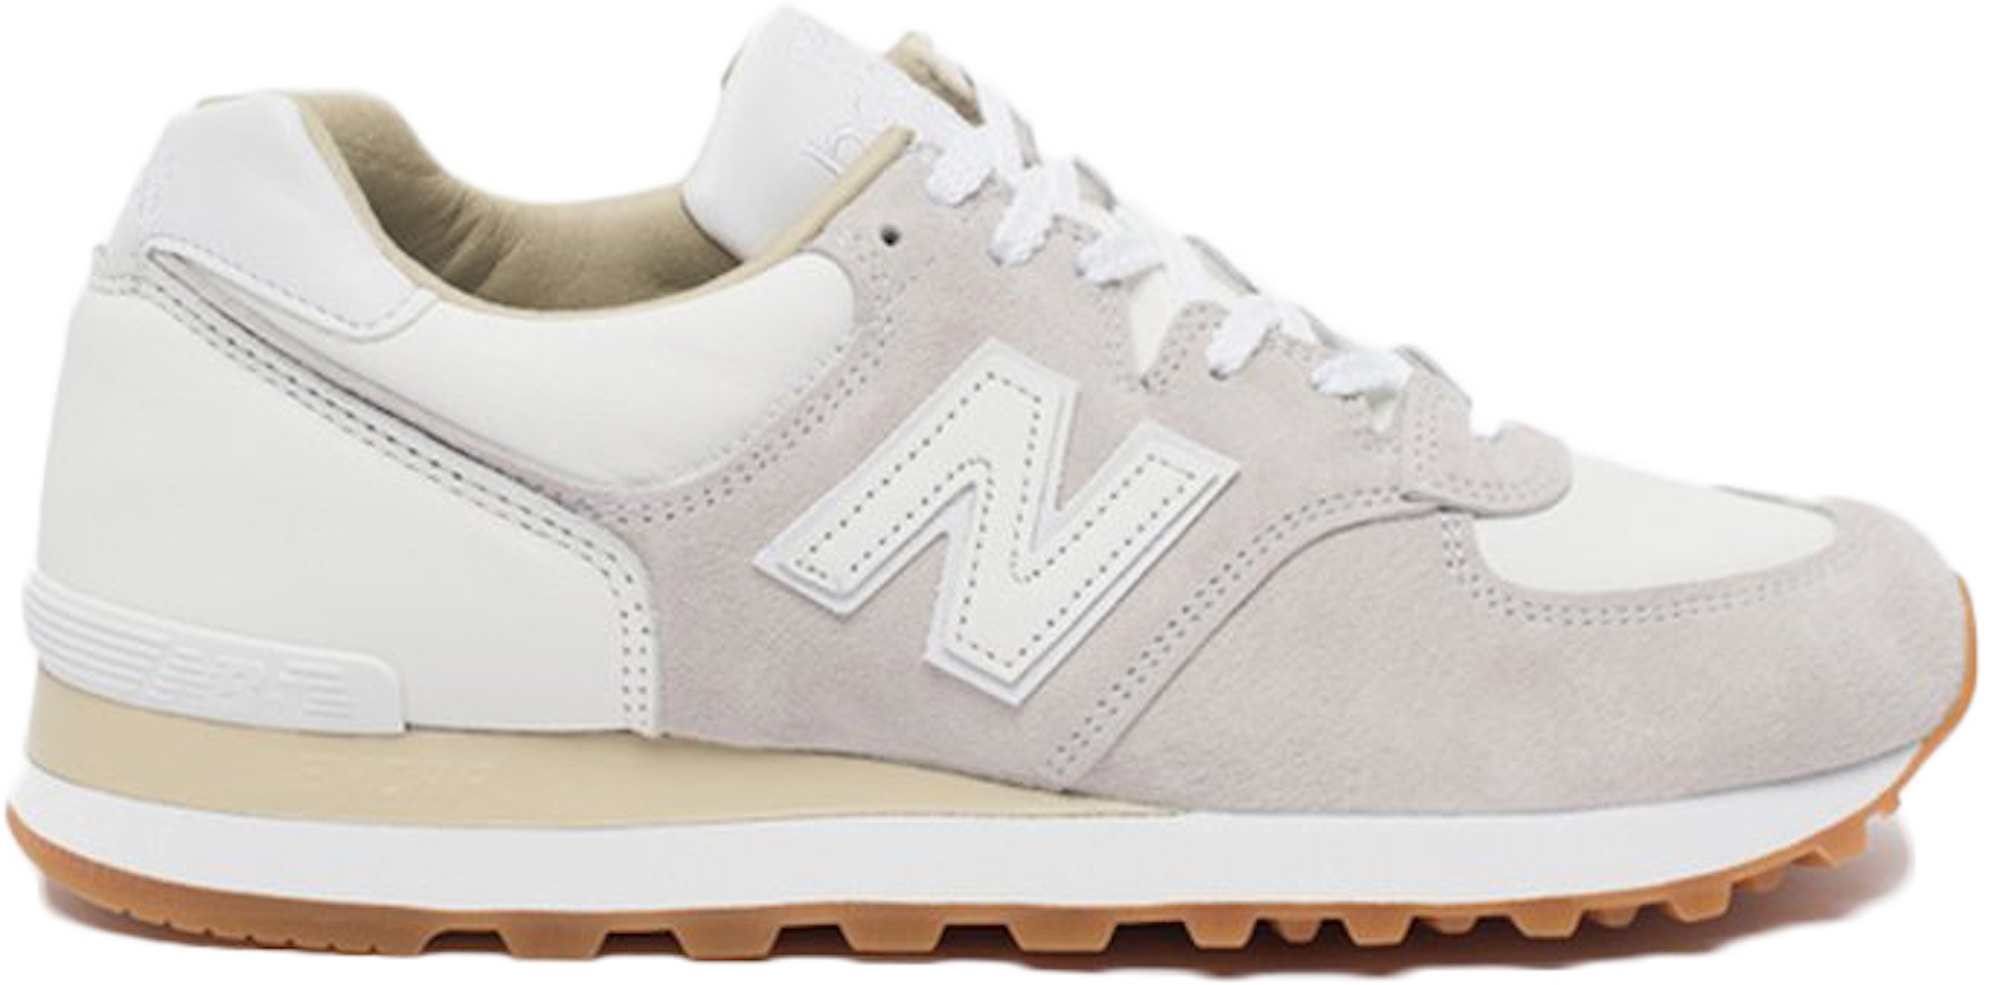 New Balance 575 END Marble White - M575END